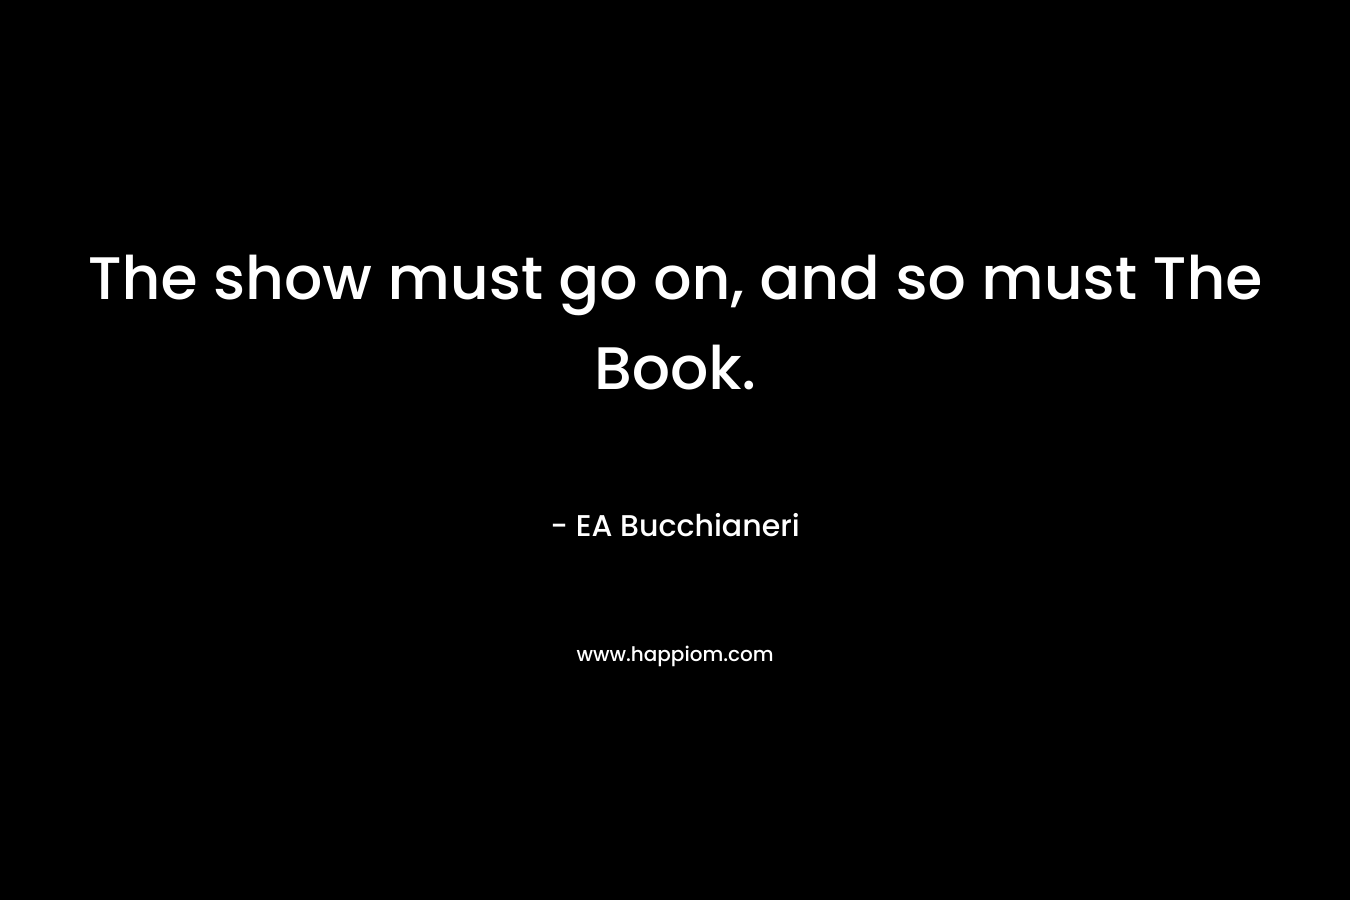 The show must go on, and so must The Book.